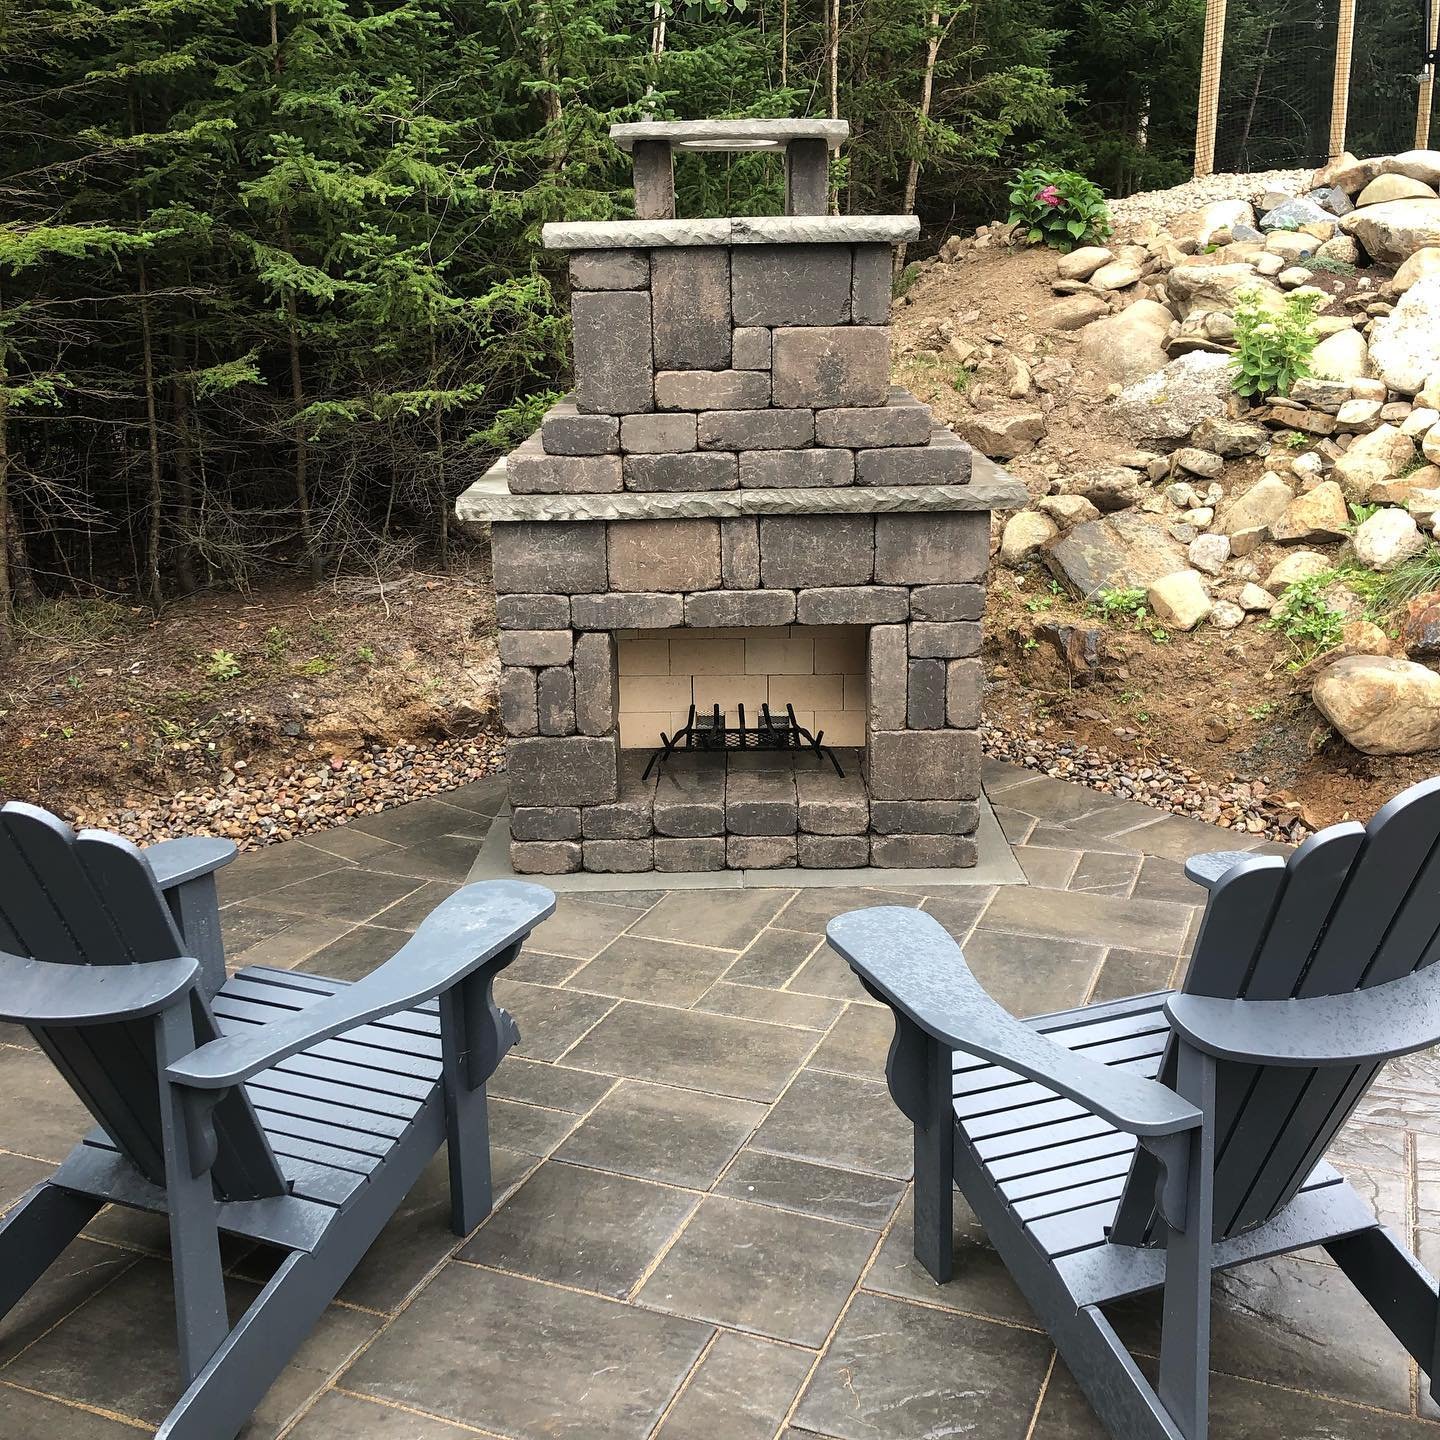 A #Brooklyn #fireplace in #Halifax, just your average glow up. 

#landscape #landscapingdesign #hardscape #contractor #brick #pavers #backyard #glowup